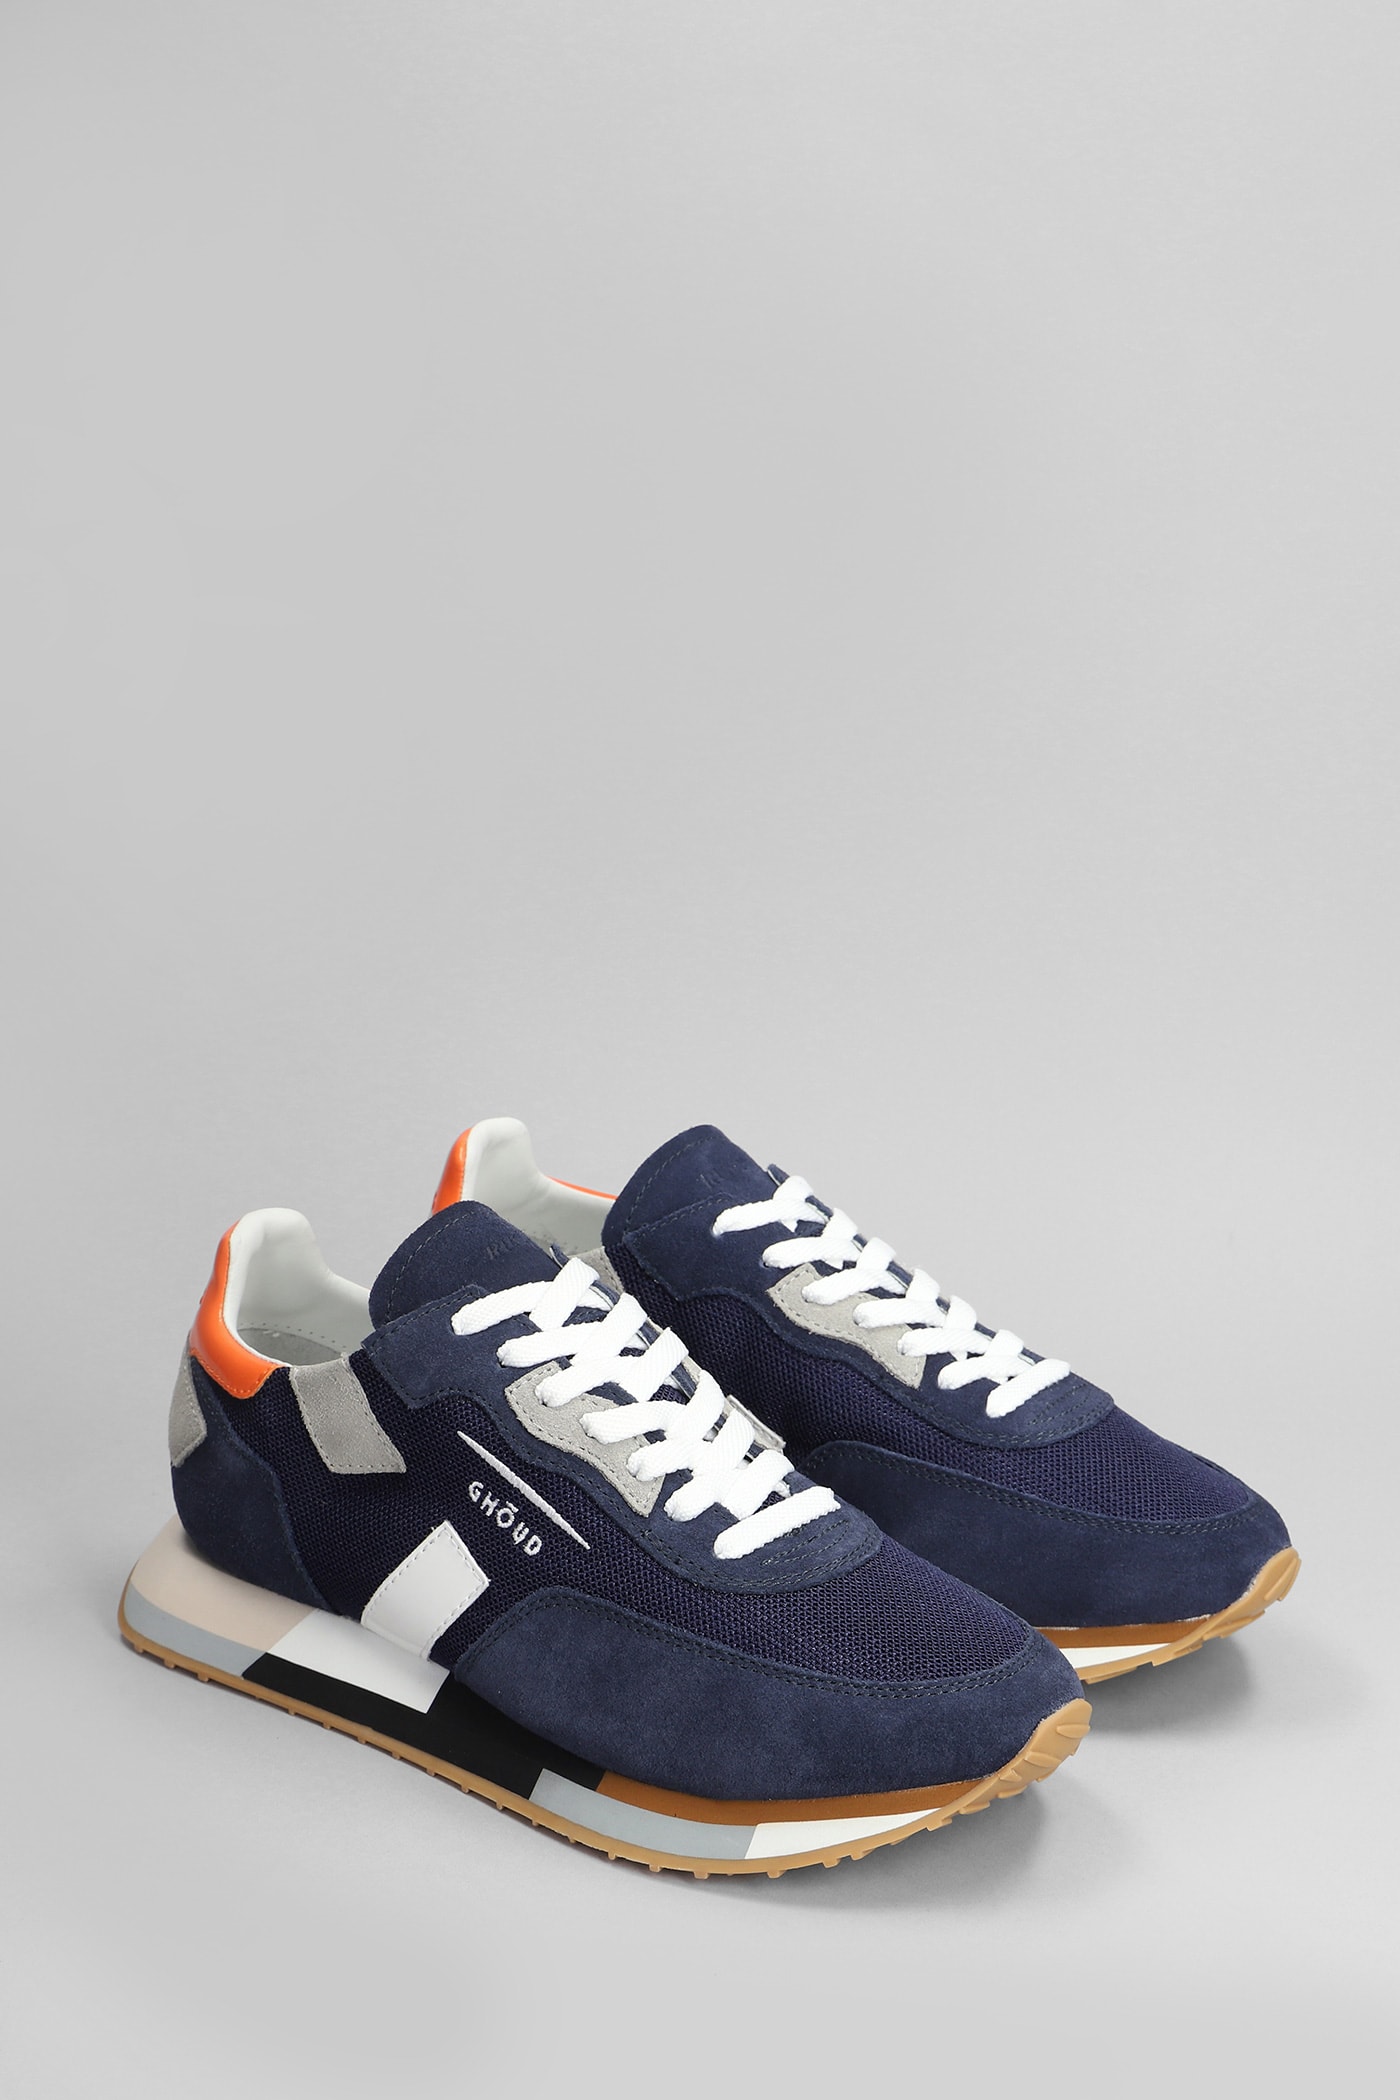 Shop Ghoud Rush Multi Sneakers In Blue Suede And Fabric